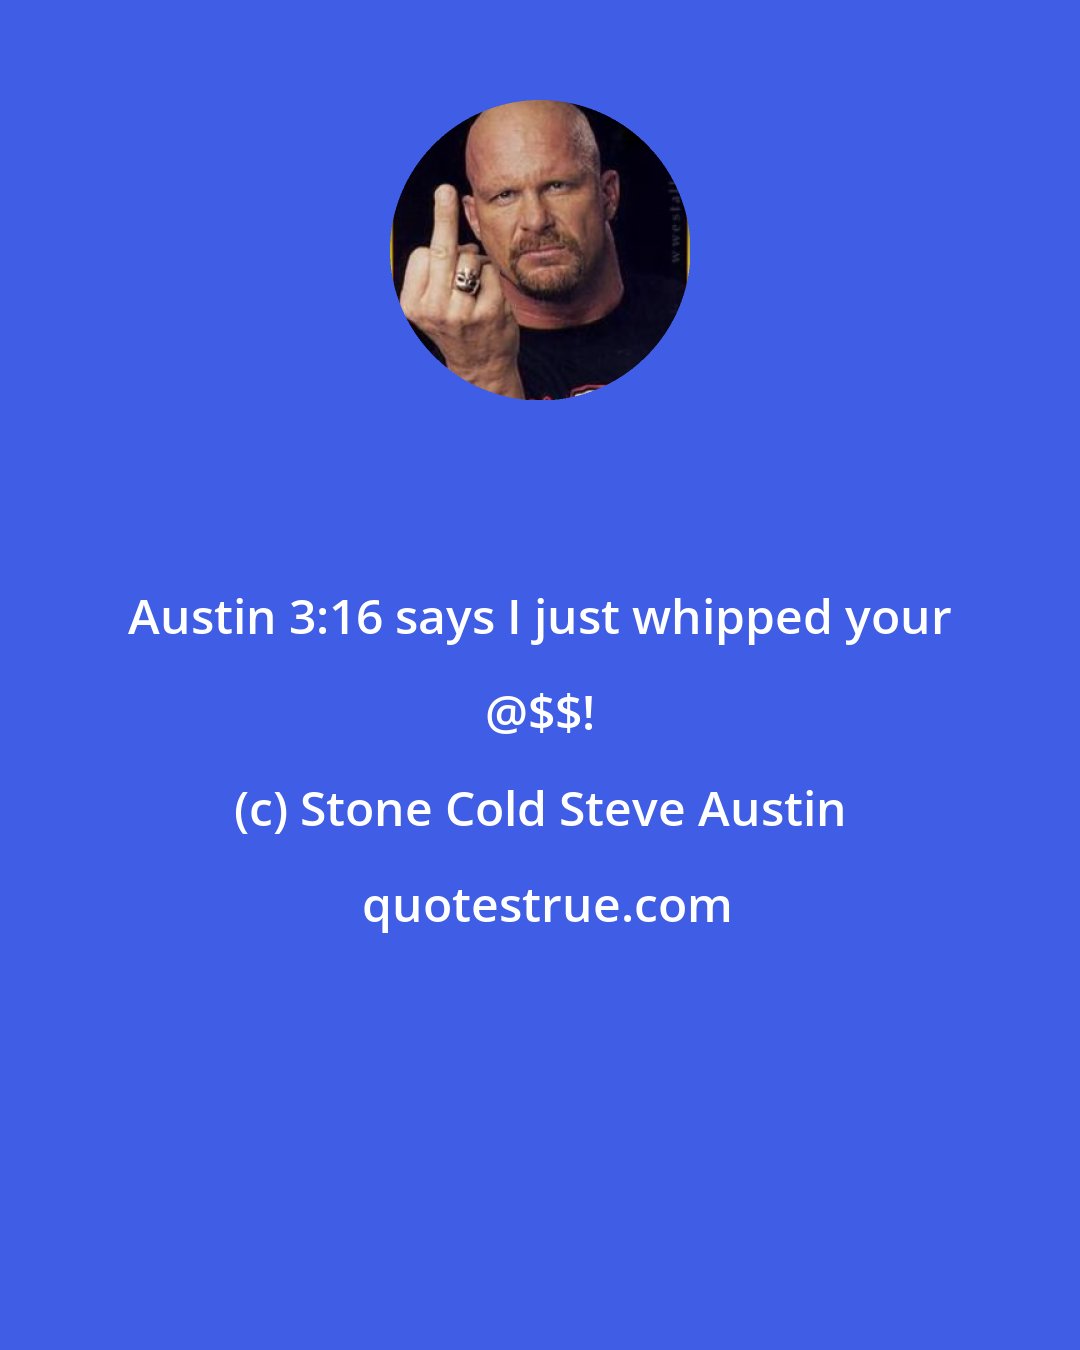 Stone Cold Steve Austin: Austin 3:16 says I just whipped your @$$!